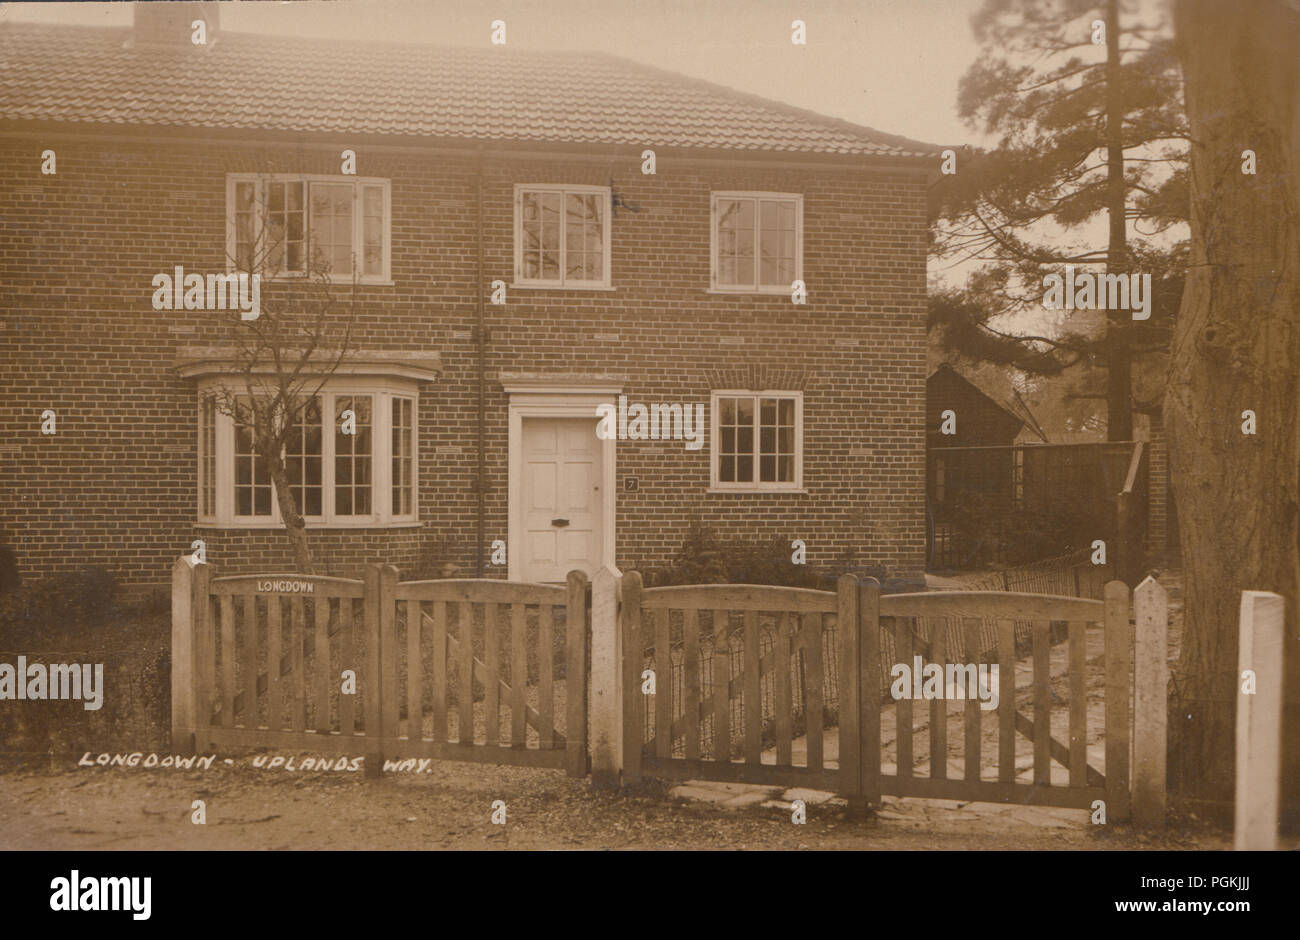 Vintage 1932 Photograph of a House Called Longdown, Uplands Way, Southampton, Hampshire, England Stock Photo